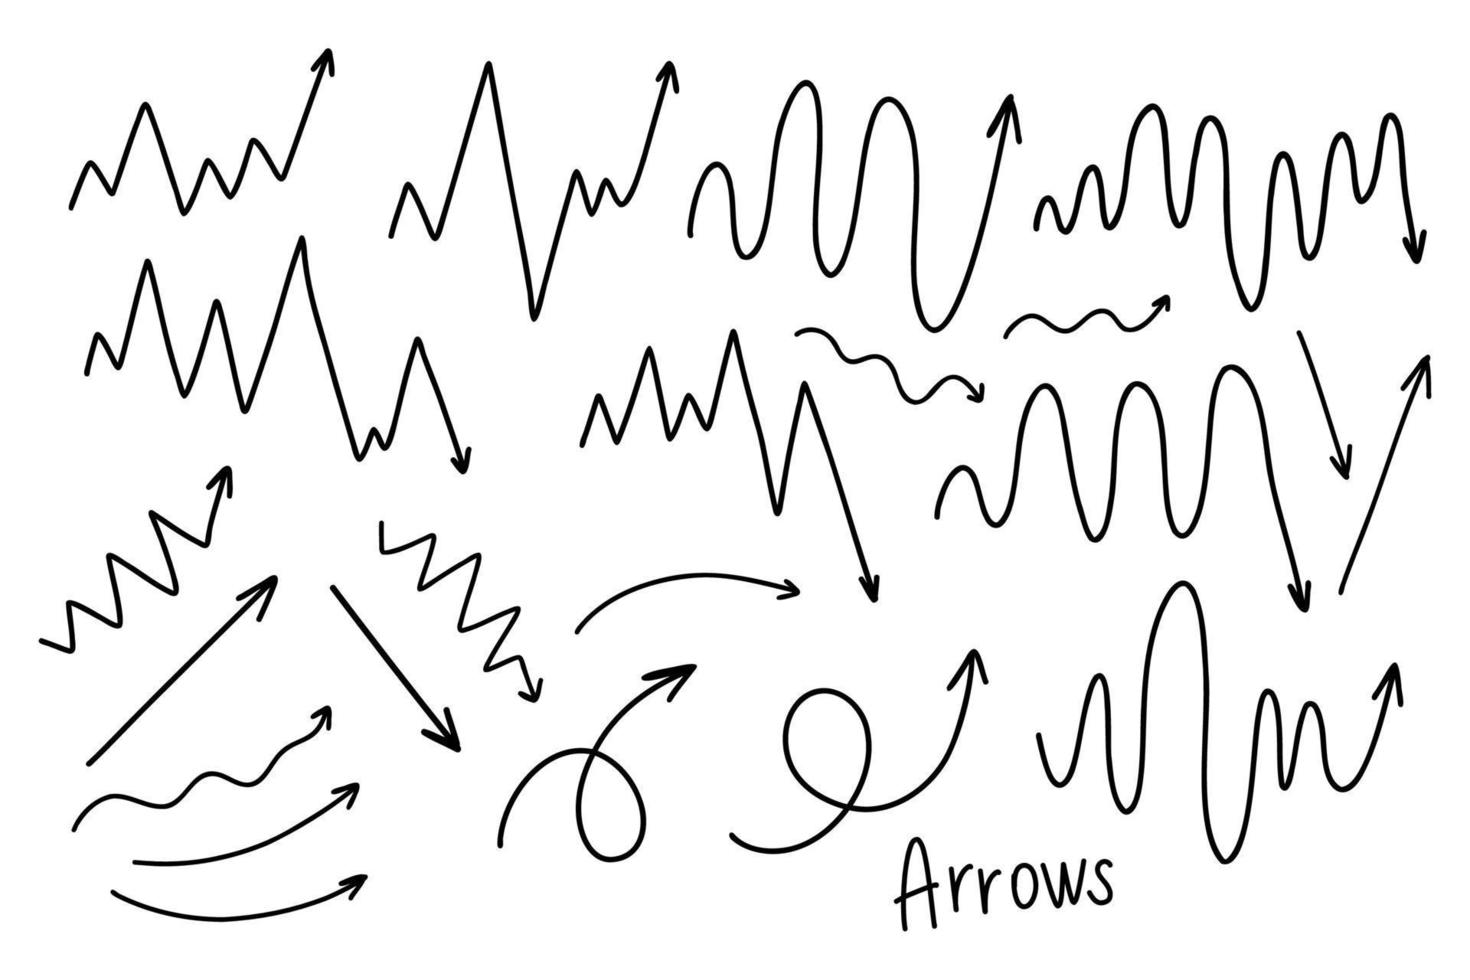 Different arrows and diagram doodle set, black and white vector illustration